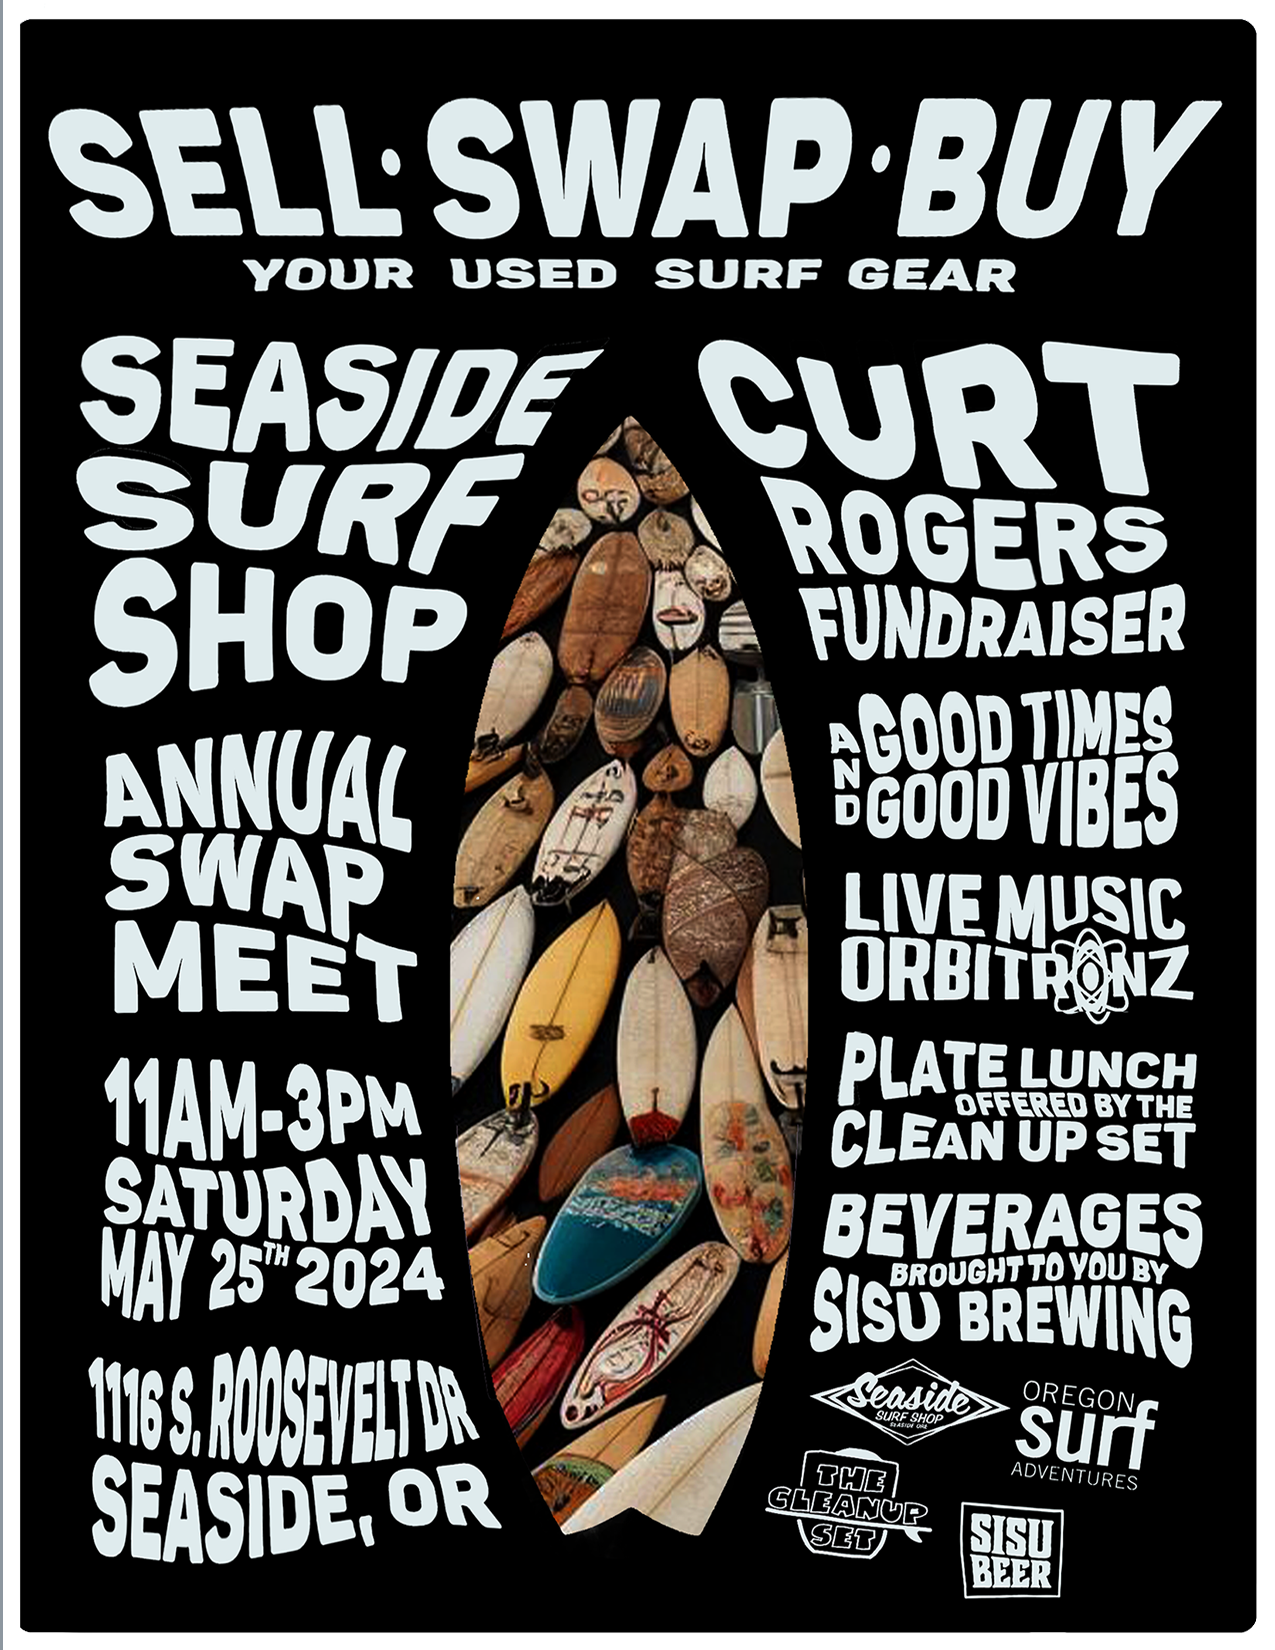 2024 Swap Meet Poster for Seaside Surf Shop and Curt Rogers Fundraiser